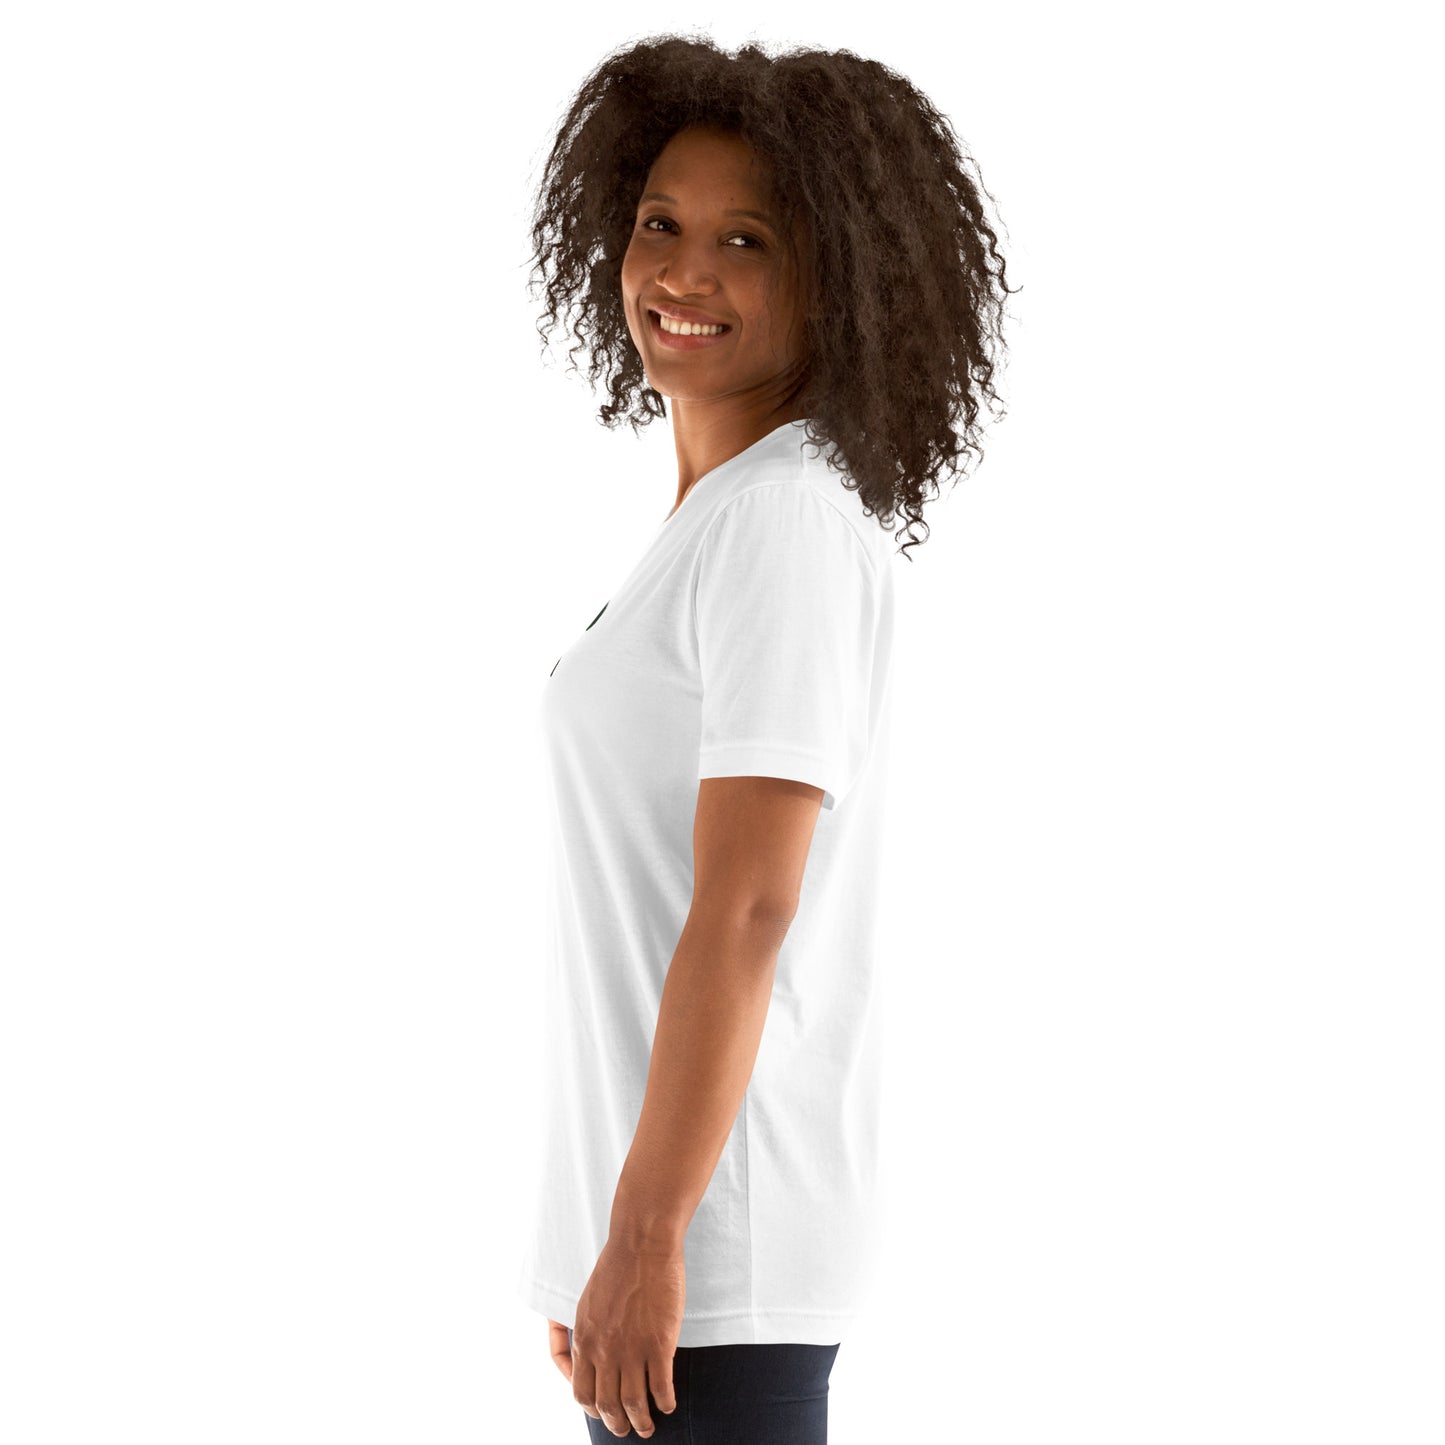 Snoubar Embroidered Unisex t-shirt with Pine tree embroidery in the middle front